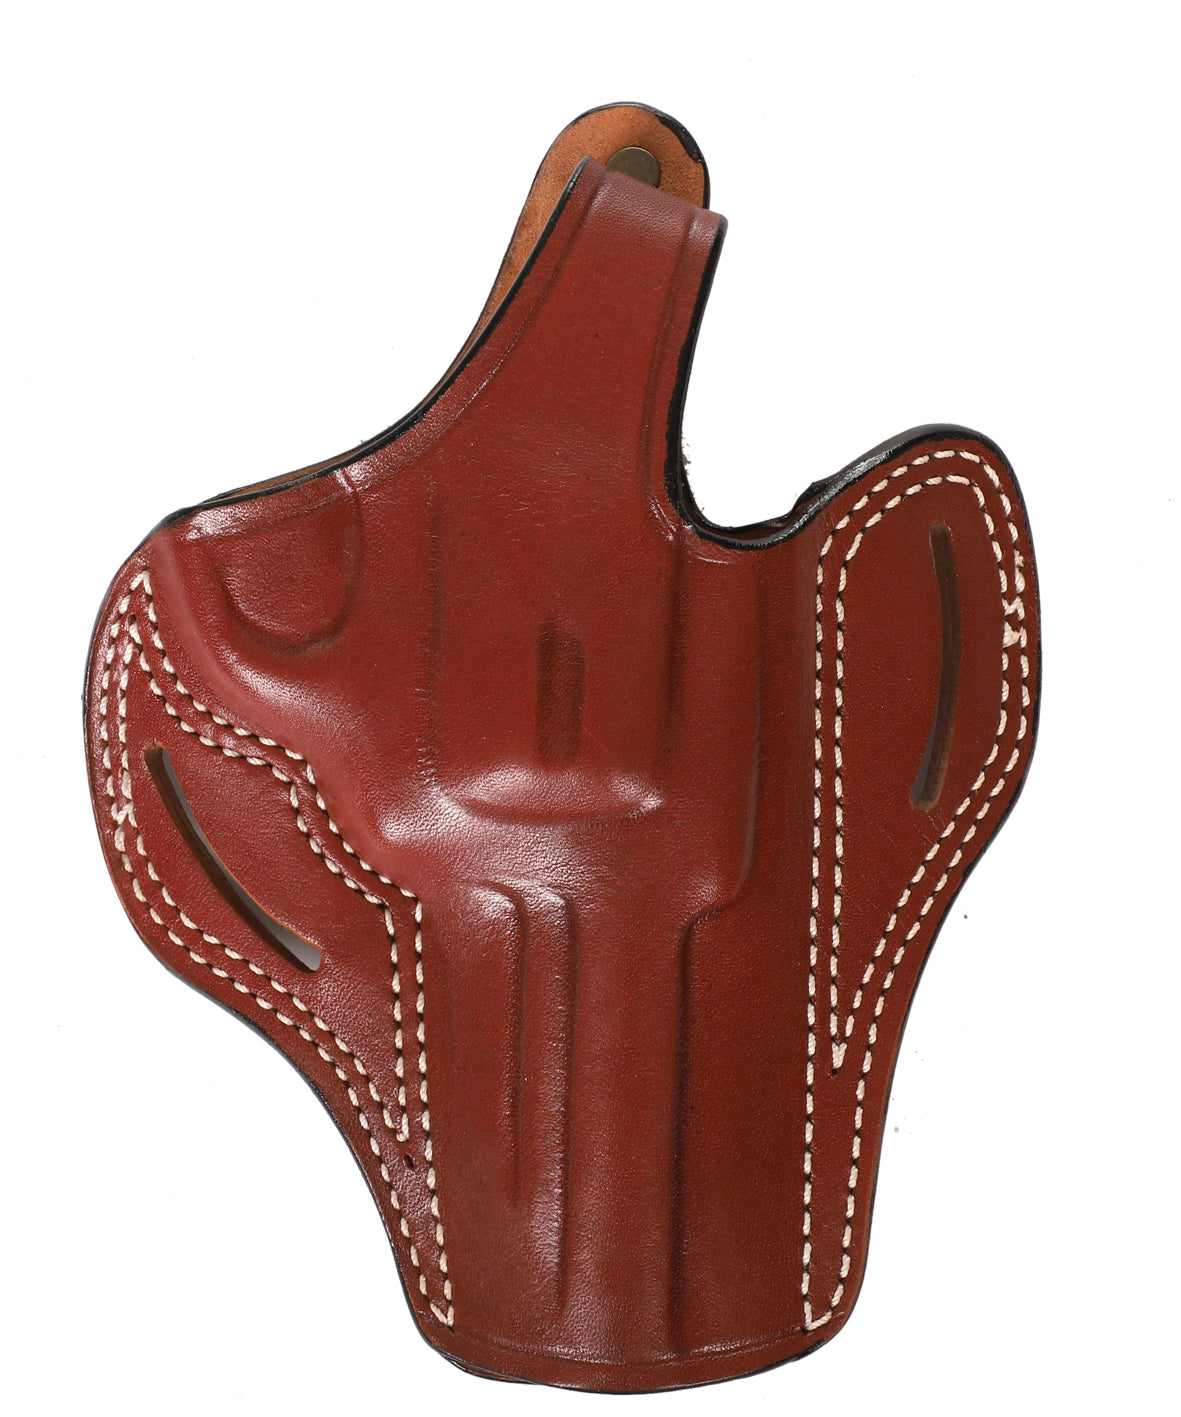 Smith Wesson Model 520 Leather OWB 4 Holster | Pusat Holster